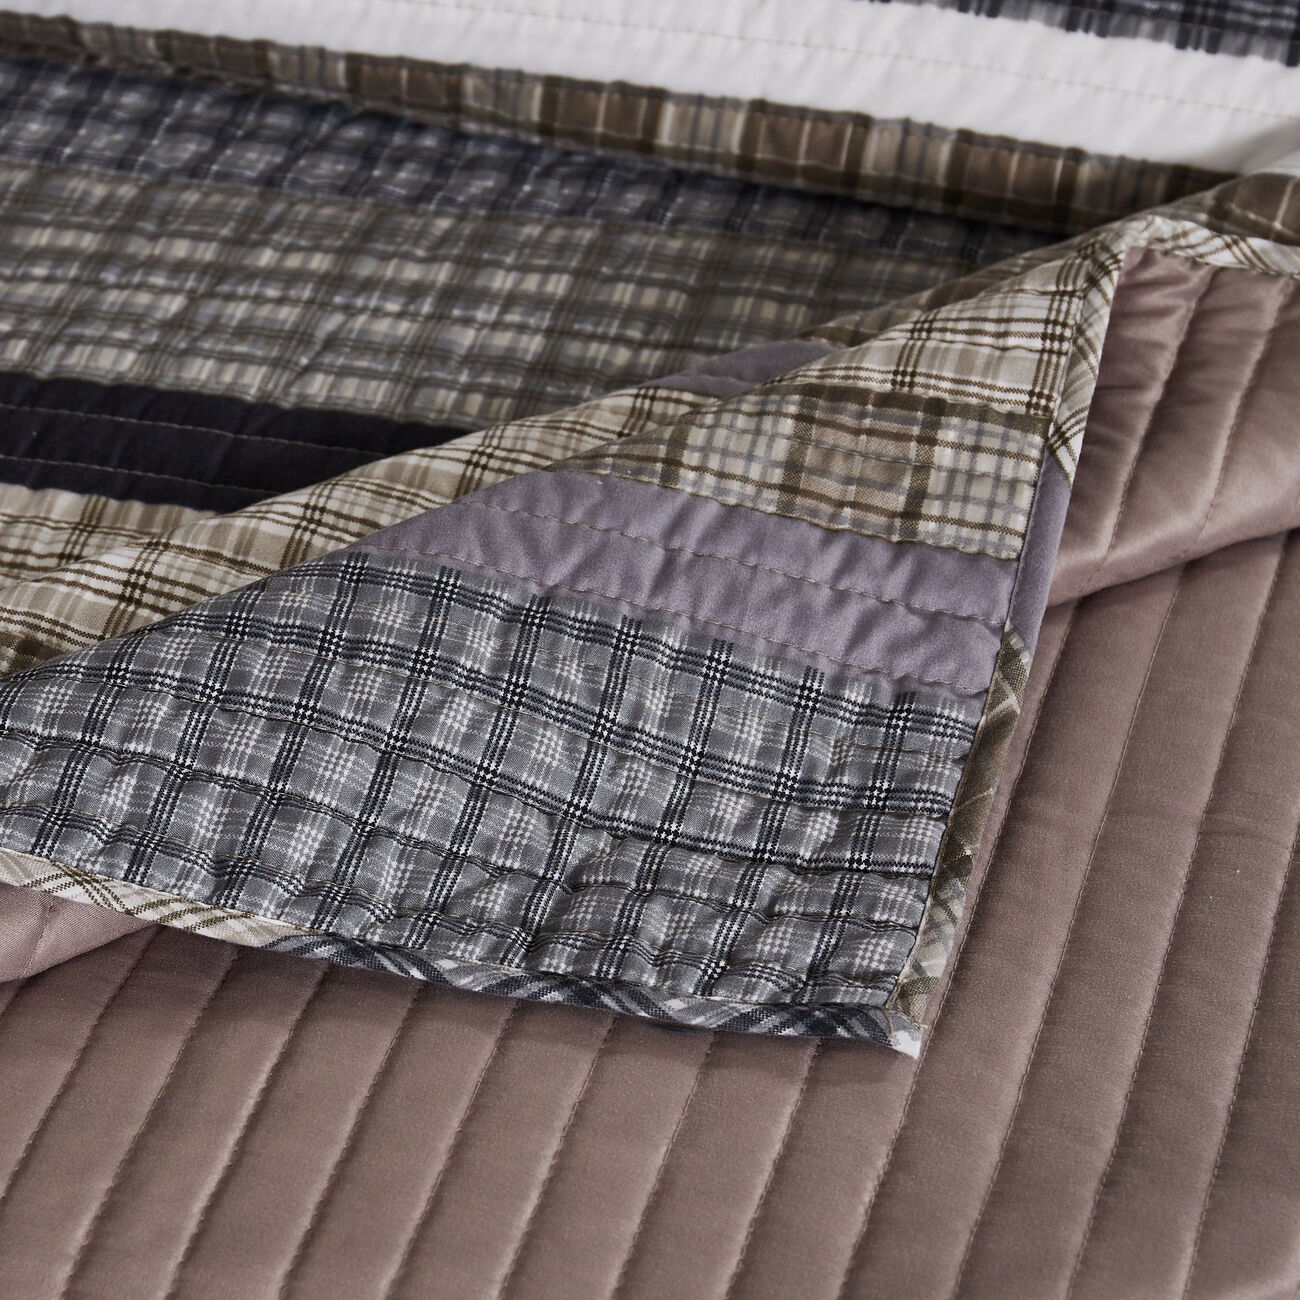 Prague 2 Piece Microfiber Plaids and Striped Pattern Twin Quilt Set, Taupe Gray